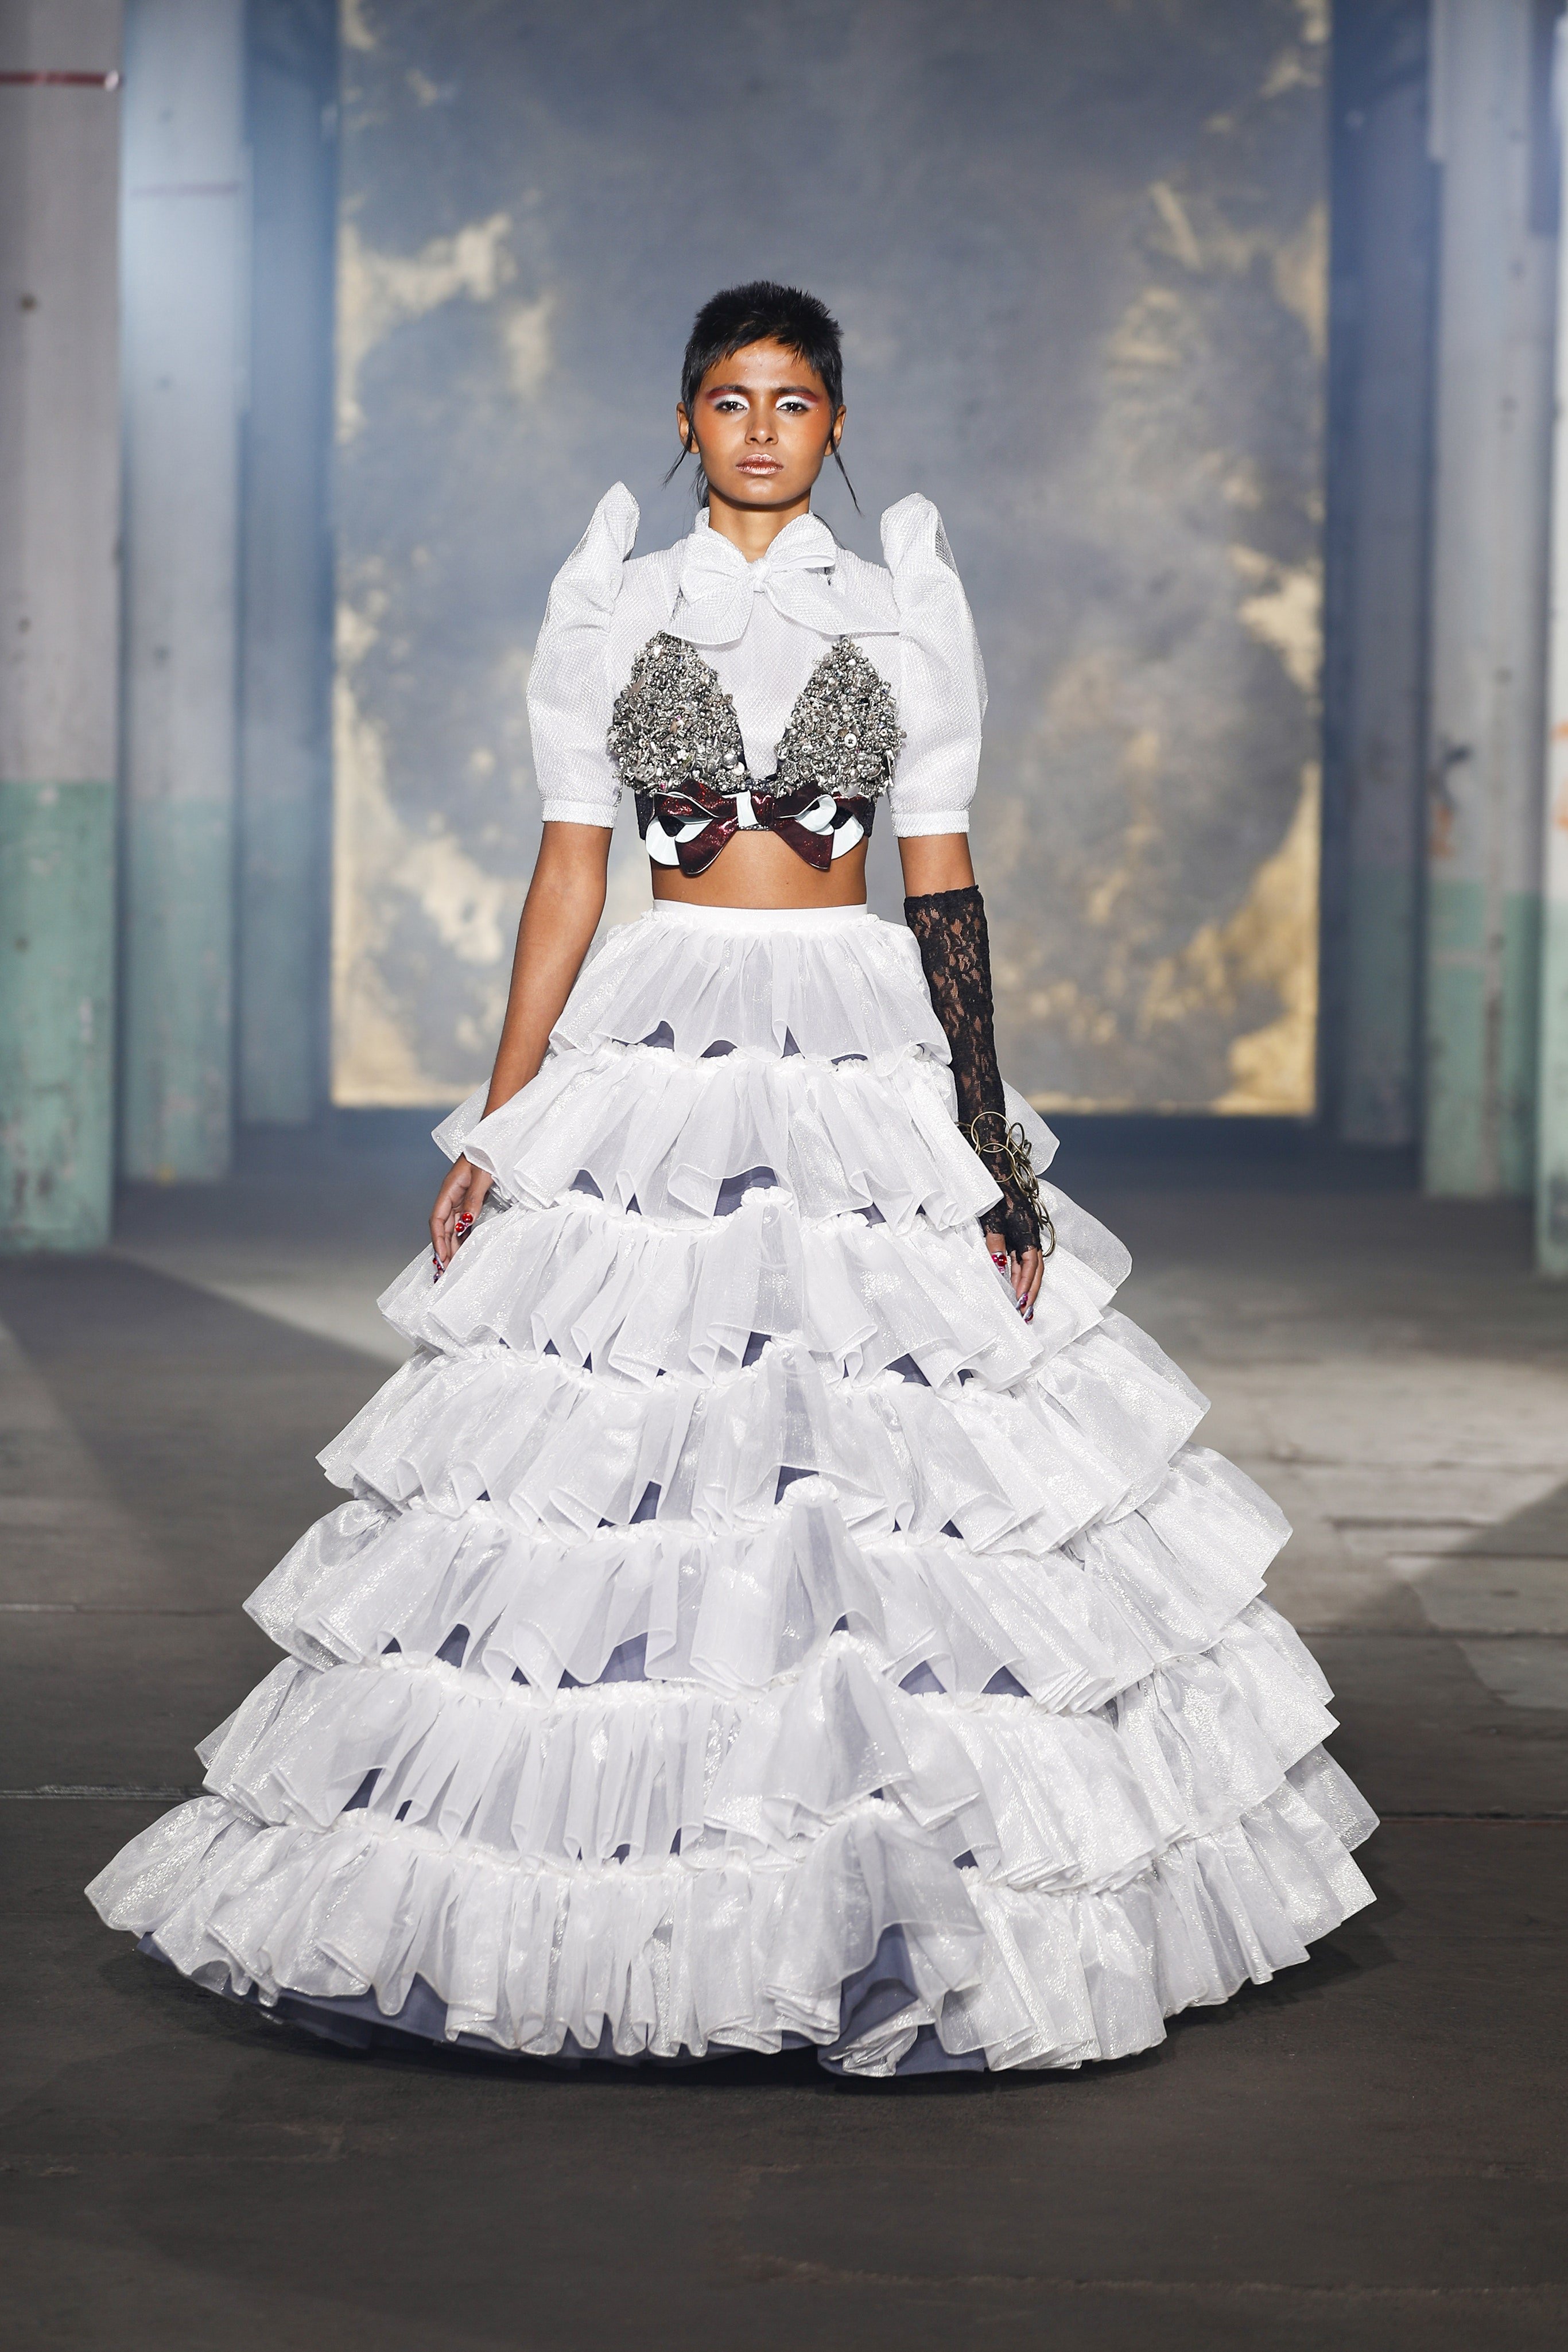 00009-Viktor-and-Rolf-Spring-21-Couture-Credit-Team-Peter-Stigter.jpg